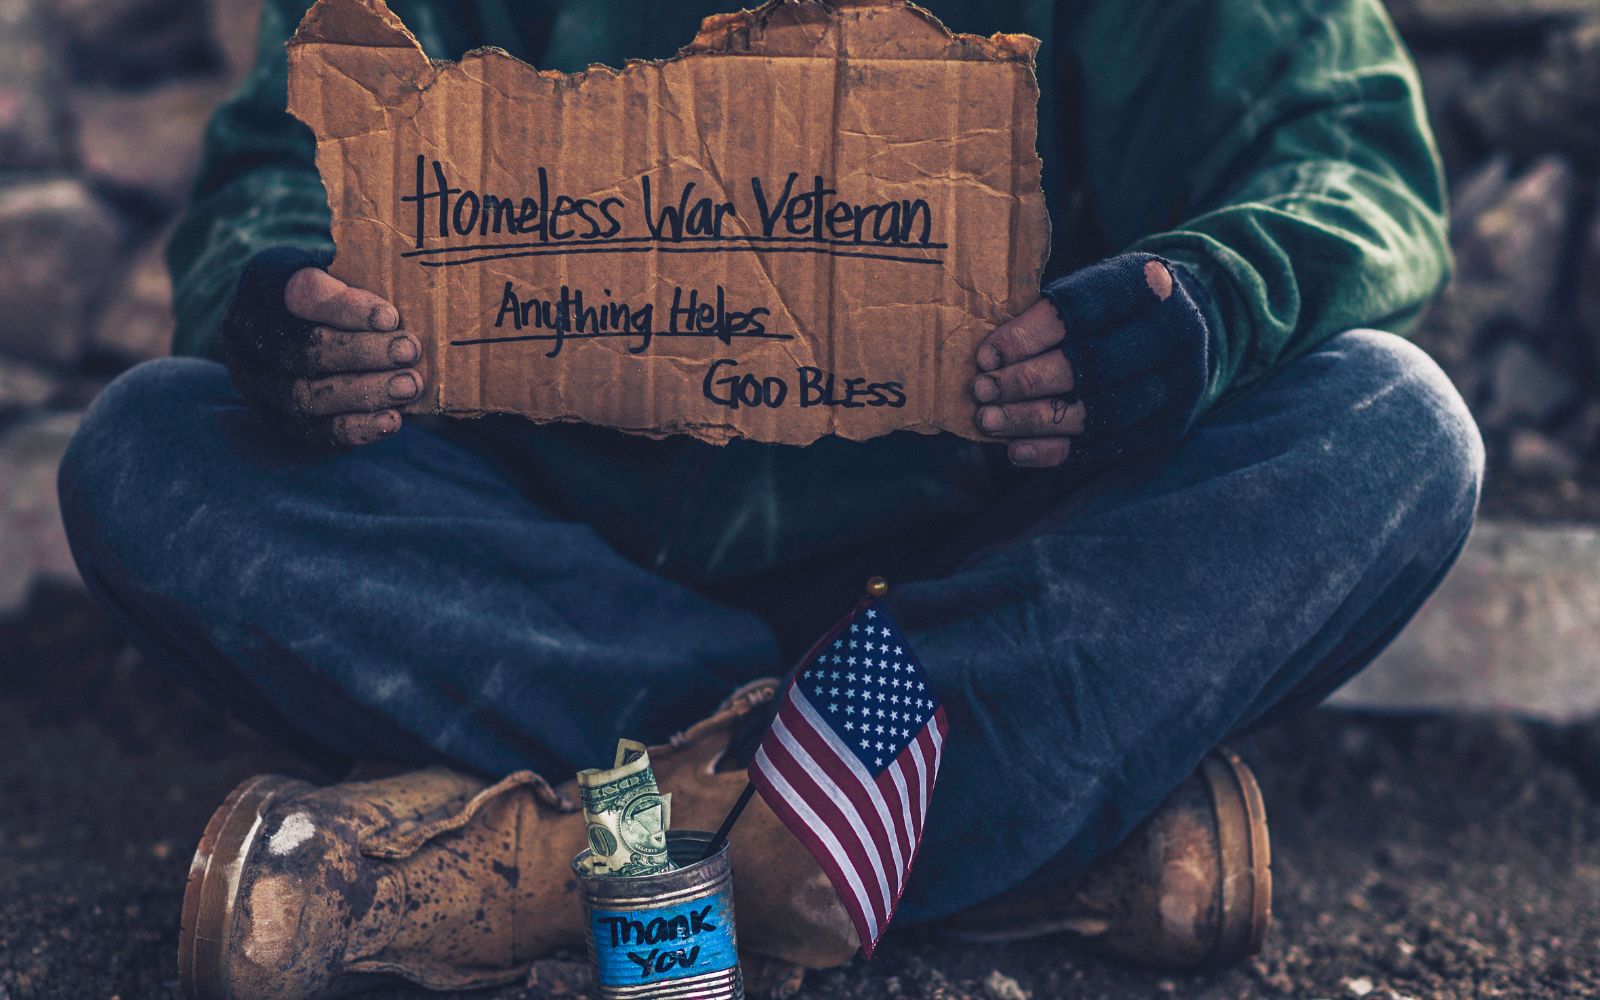 Man holding sigh saying "Homeless War Veteran Anything Helps God Bless" with American Flag